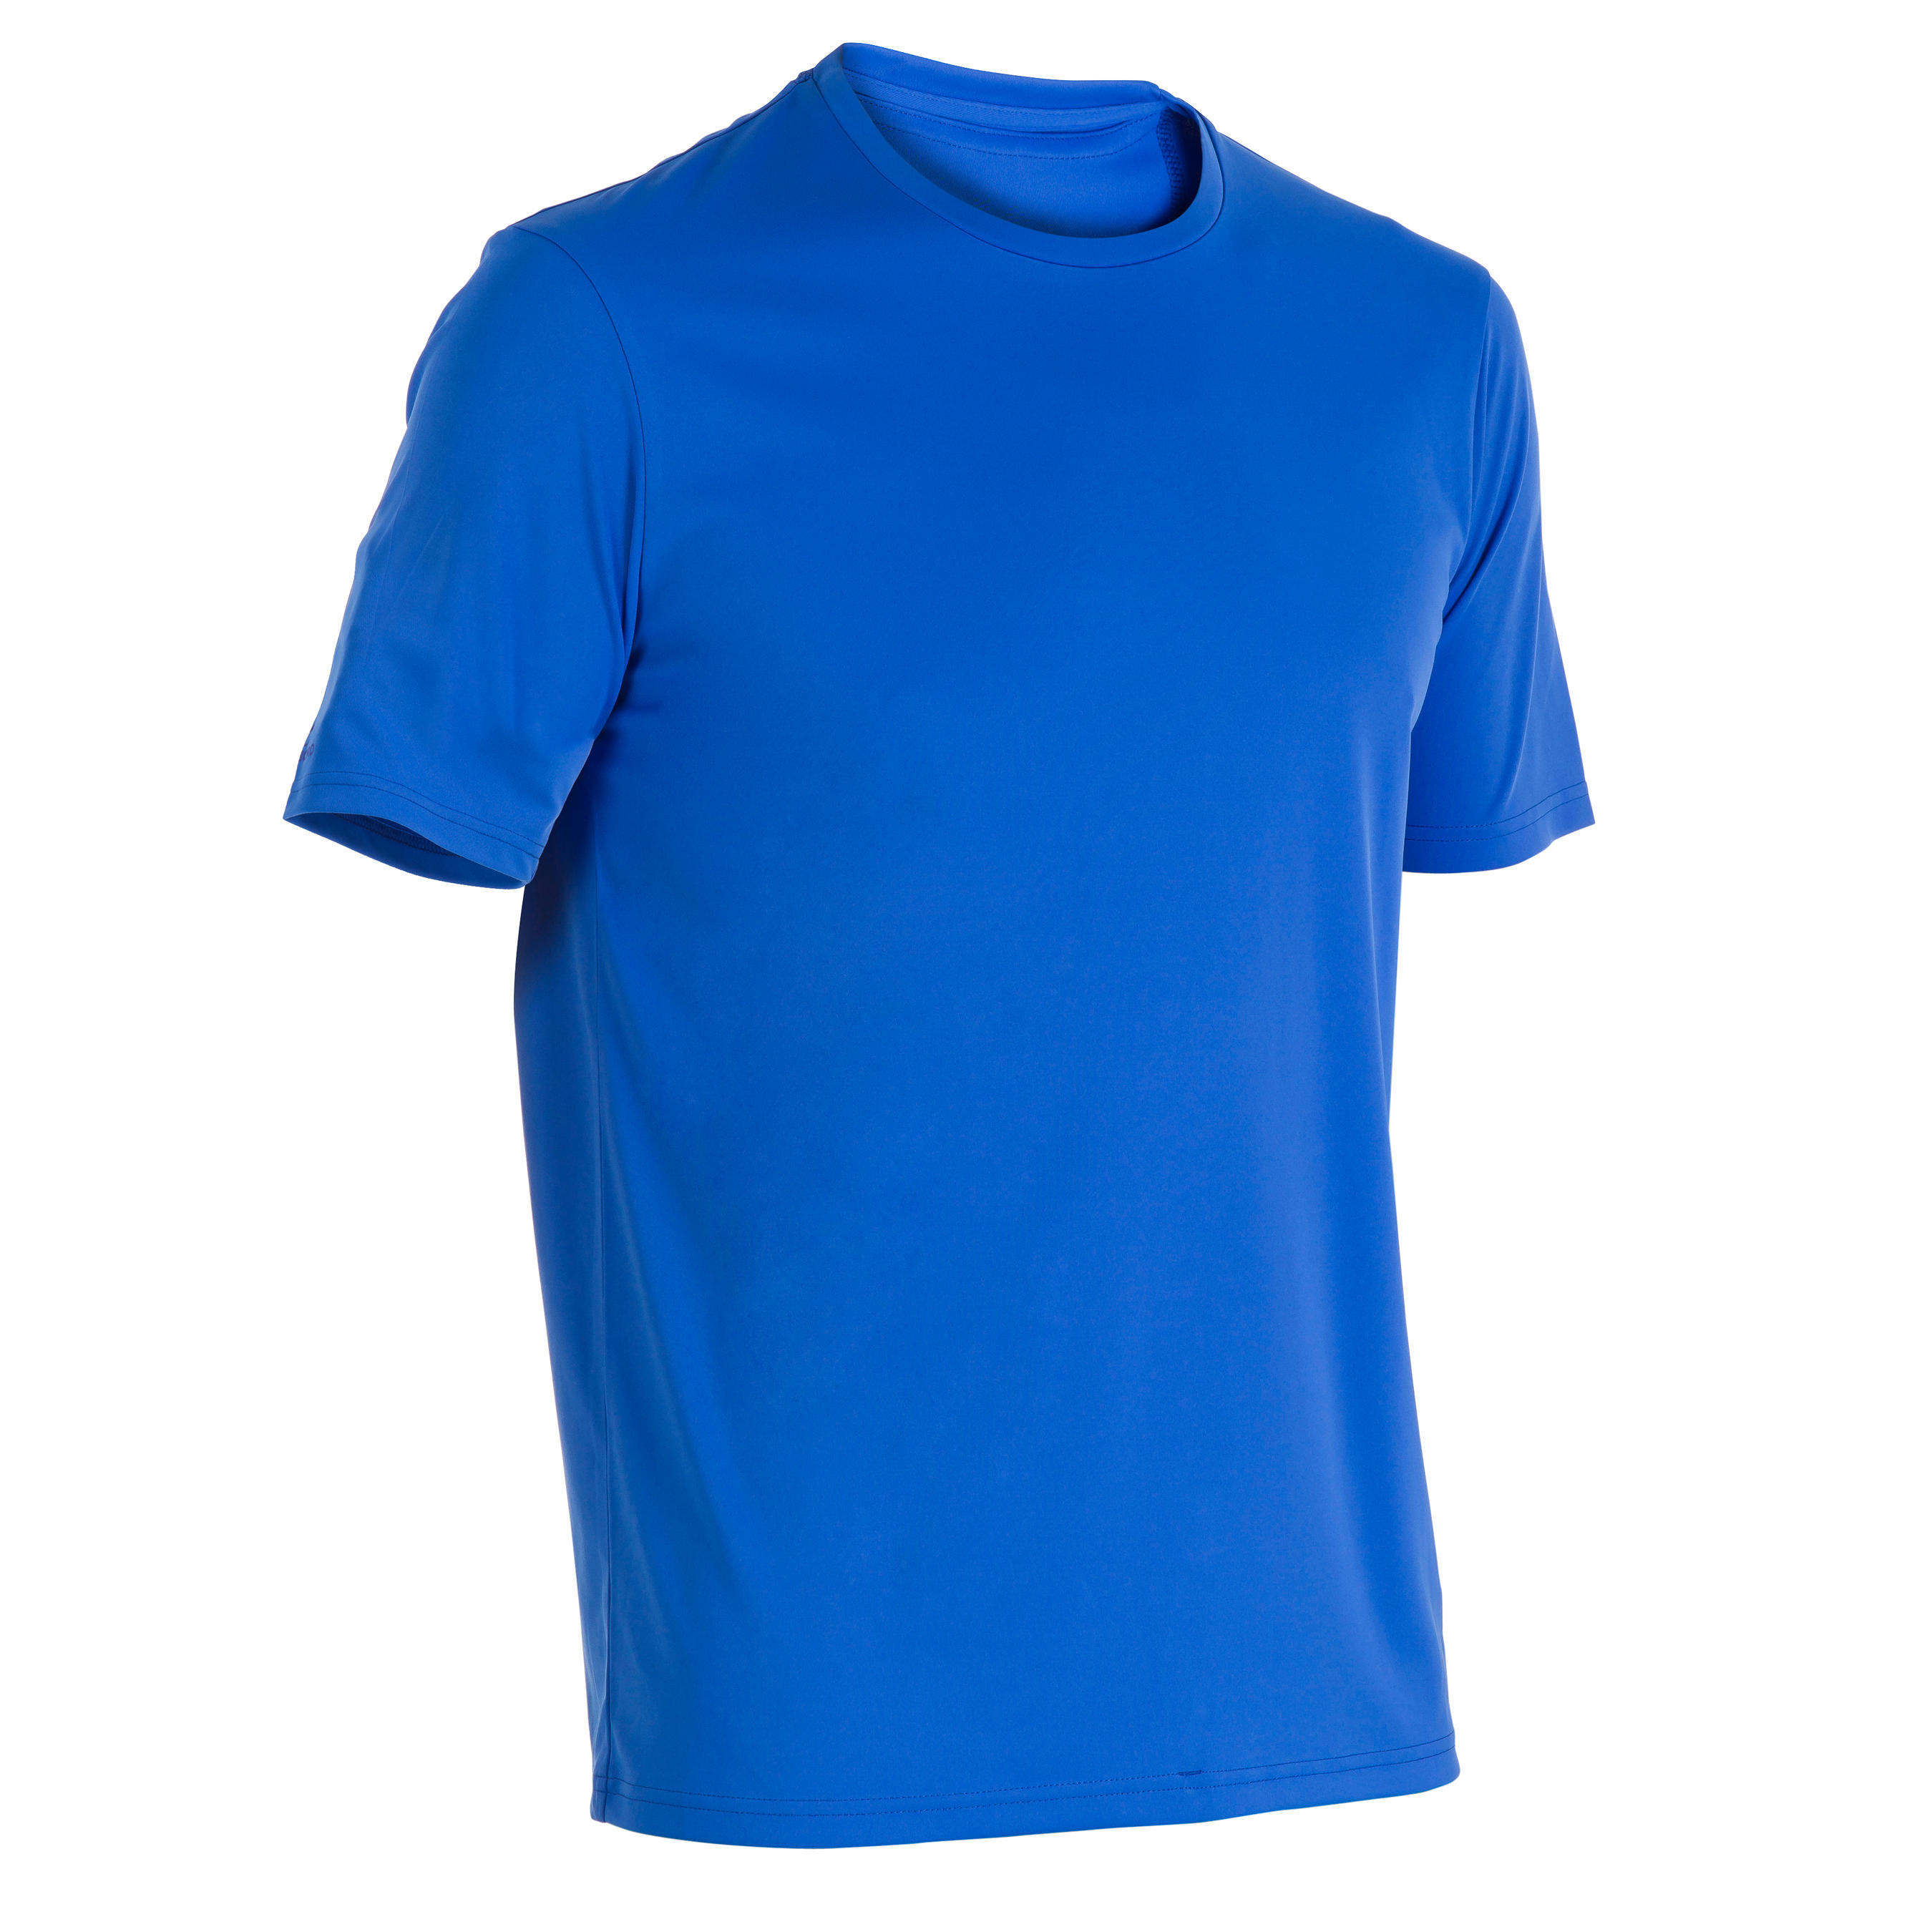 Buy Surfing Solar Protection Online In India|Water T Shirt Uv Man Blue ...